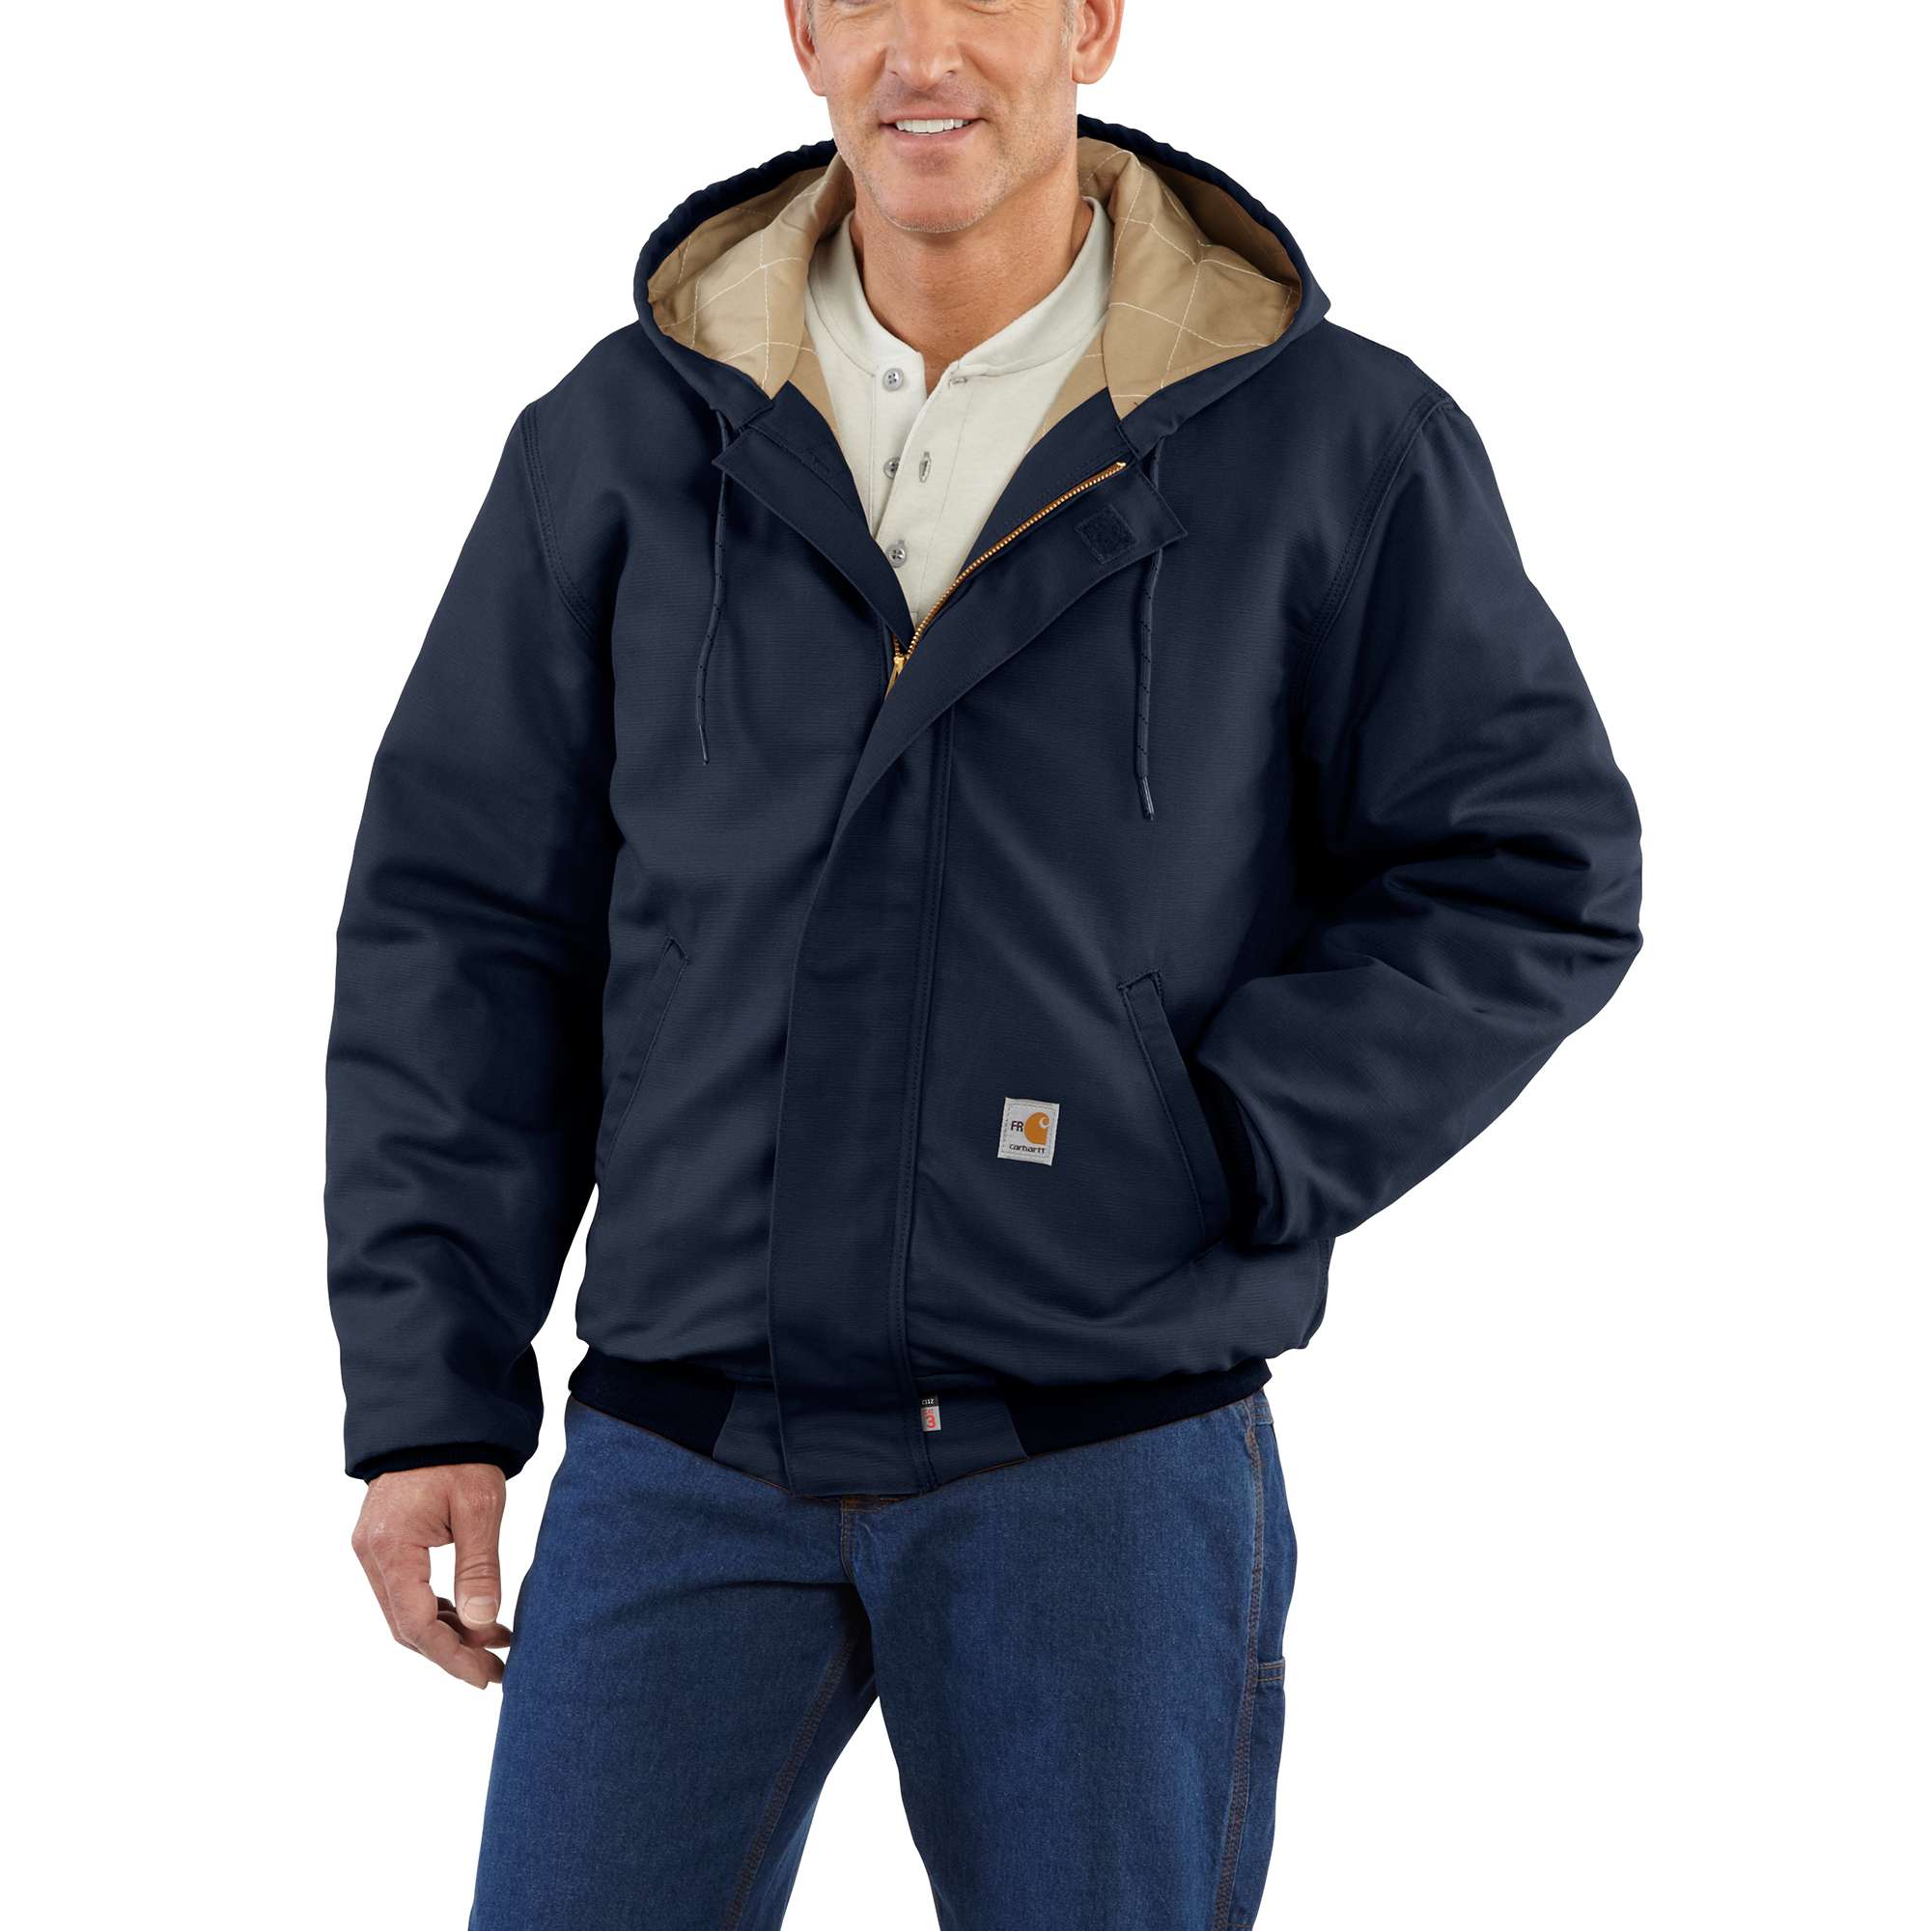 Carhartt Flame-resistant Midweight Active Jac/quilt-lined